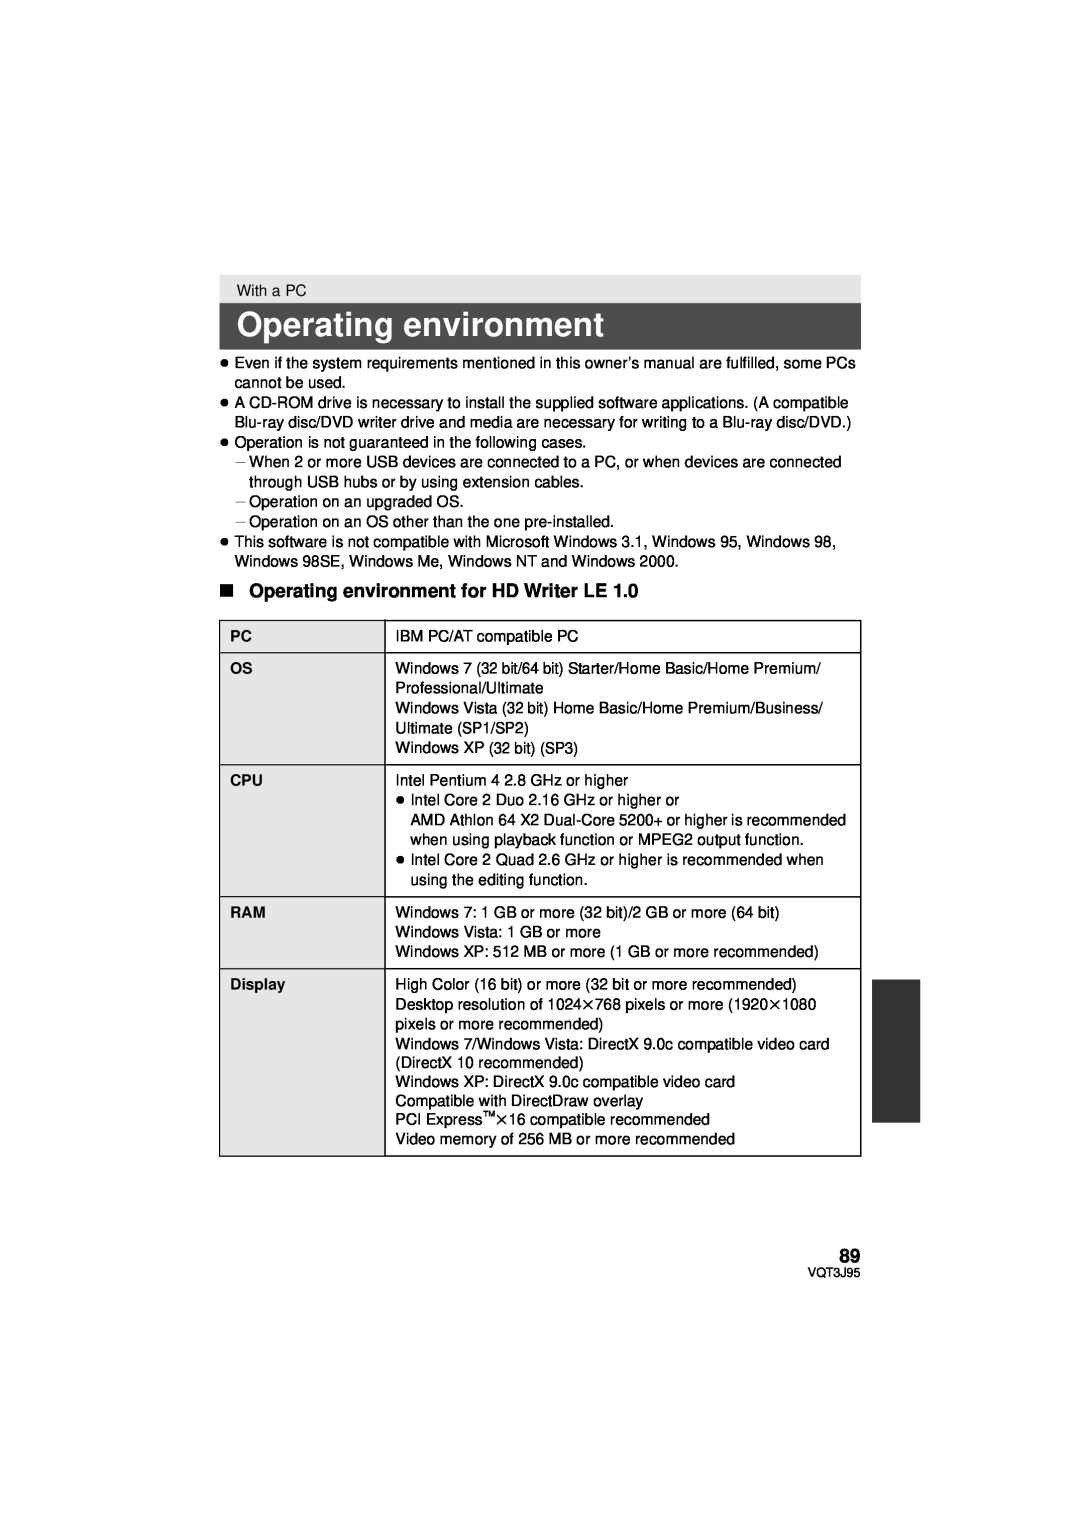 Panasonic HDC-TM40P/PC, HDC-SD40P/PC, HDC-TM41P/PC owner manual ∫ Operating environment for HD Writer LE, Display 